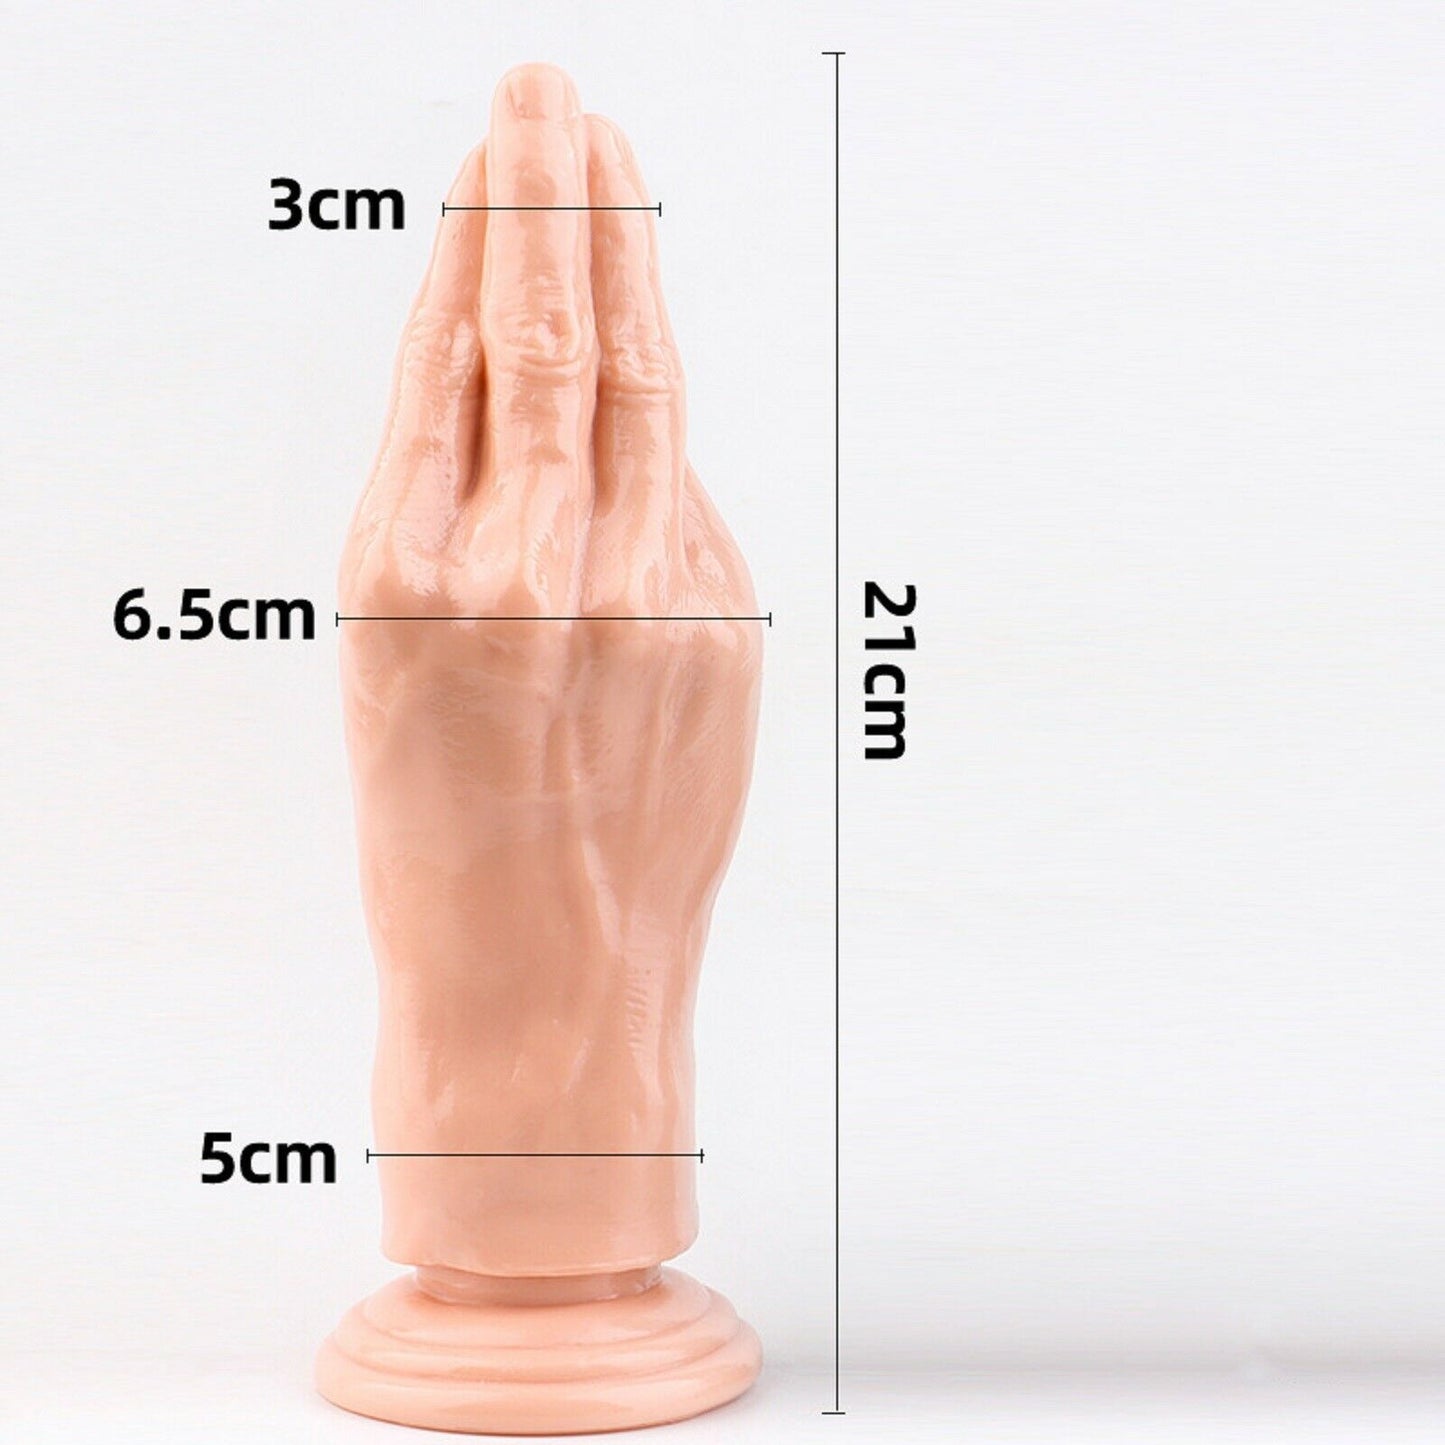 8.3" Dildo Hand Fist Fisting Monster Anal HUGE Realistic Dong Adult Sex Toy